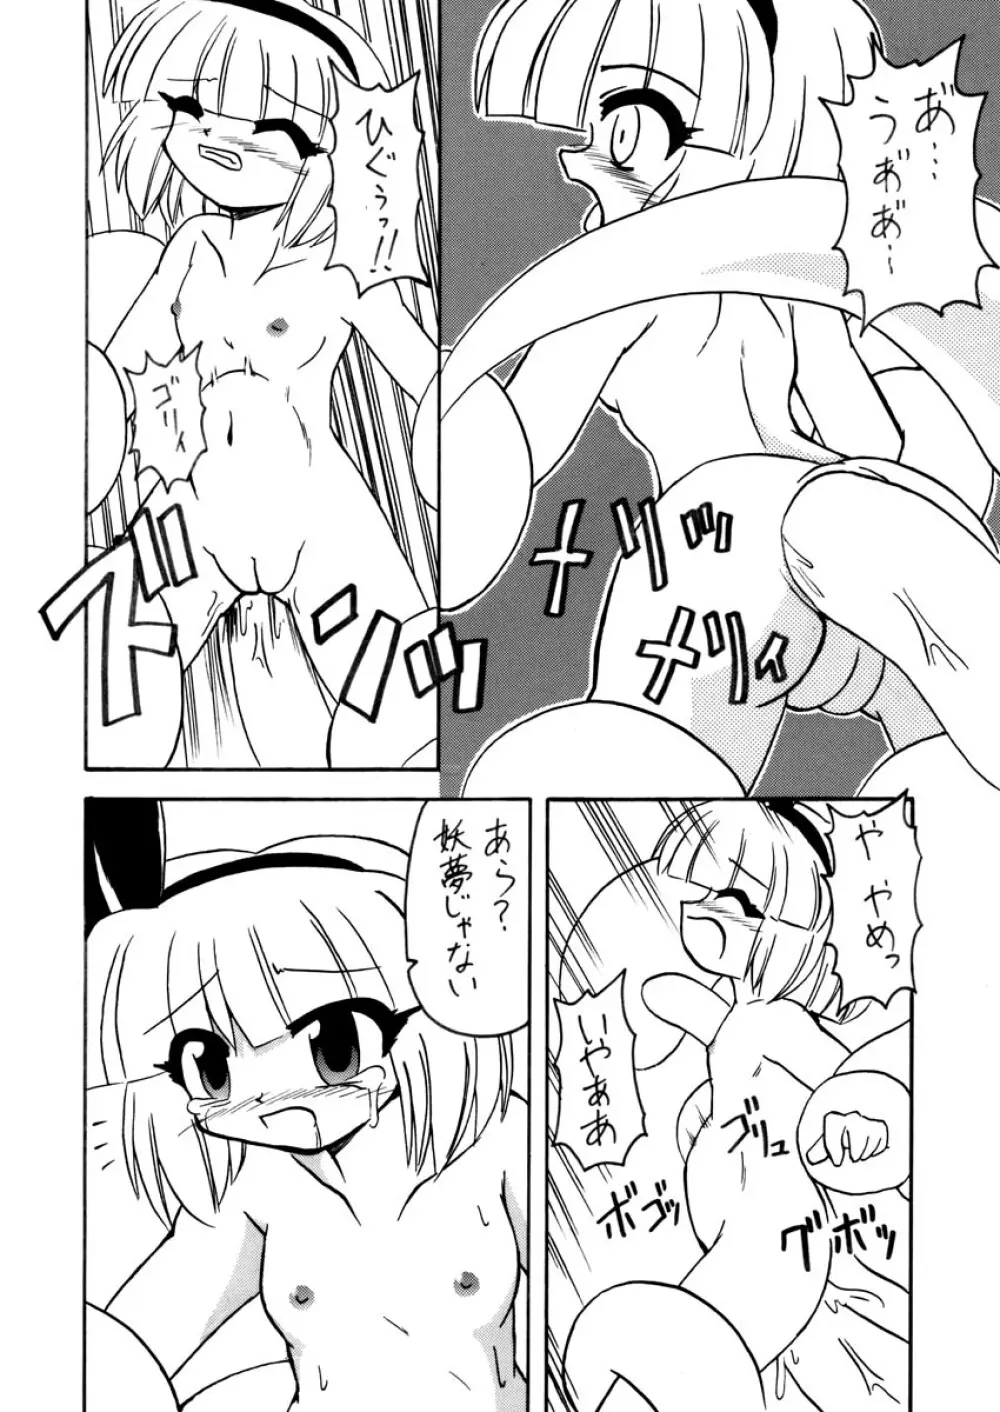 Touhou Tentacles {Touhou Project} - page4